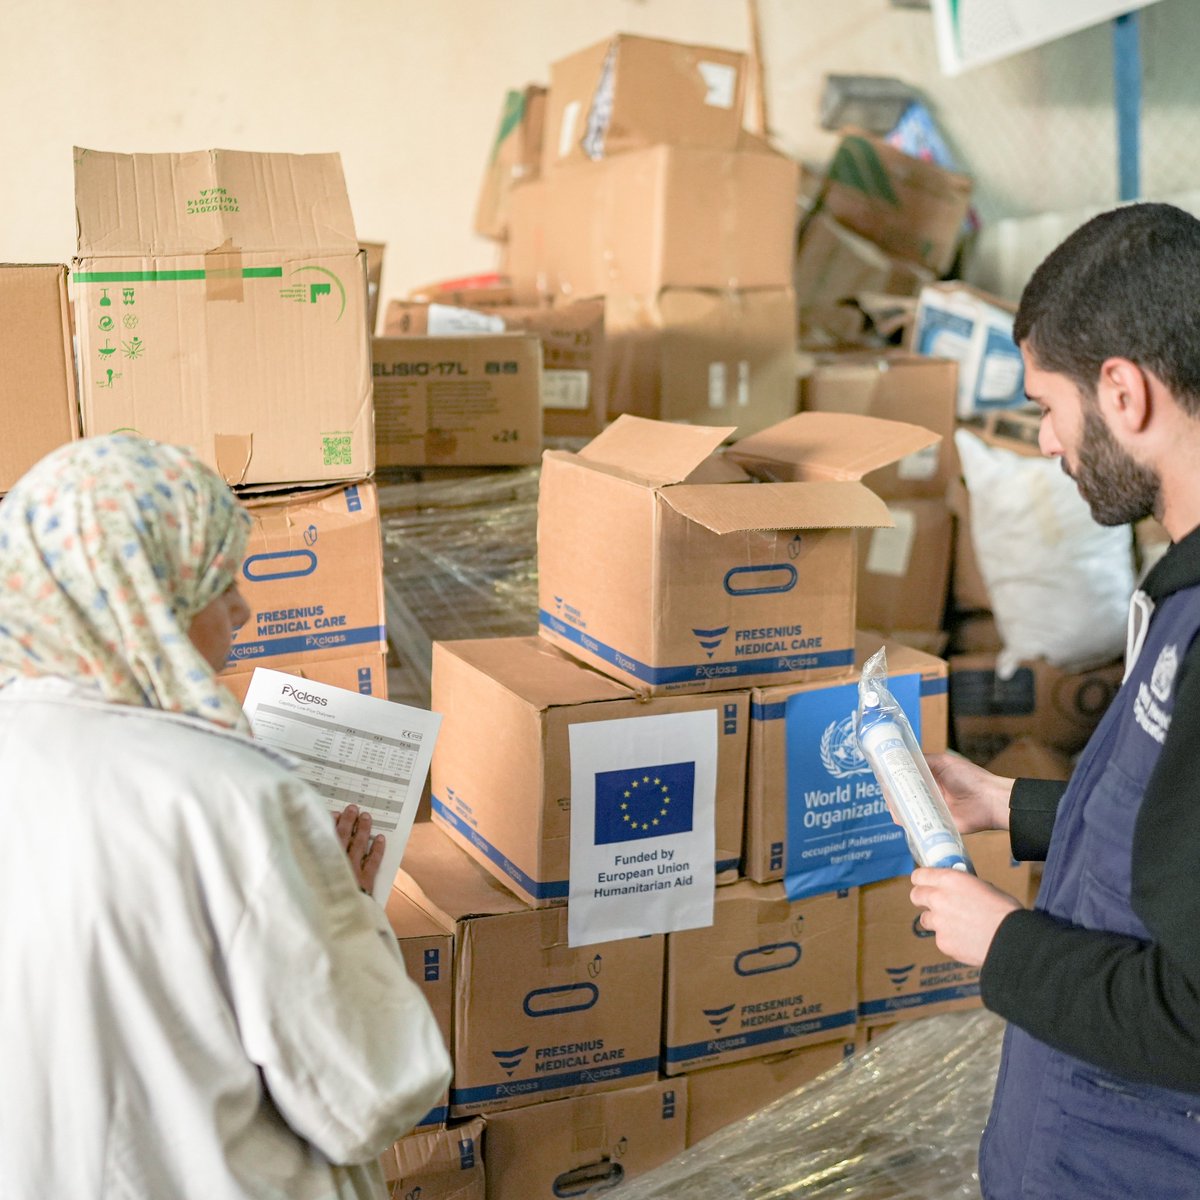 Gaza has been facing dire shortages of food, water, and health care. Many are on the brink of famine. With @WHO, the EU is delivering life-saving medicines to the most vulnerable Palestinians, who are suffering from serious ailments due to the ongoing war.